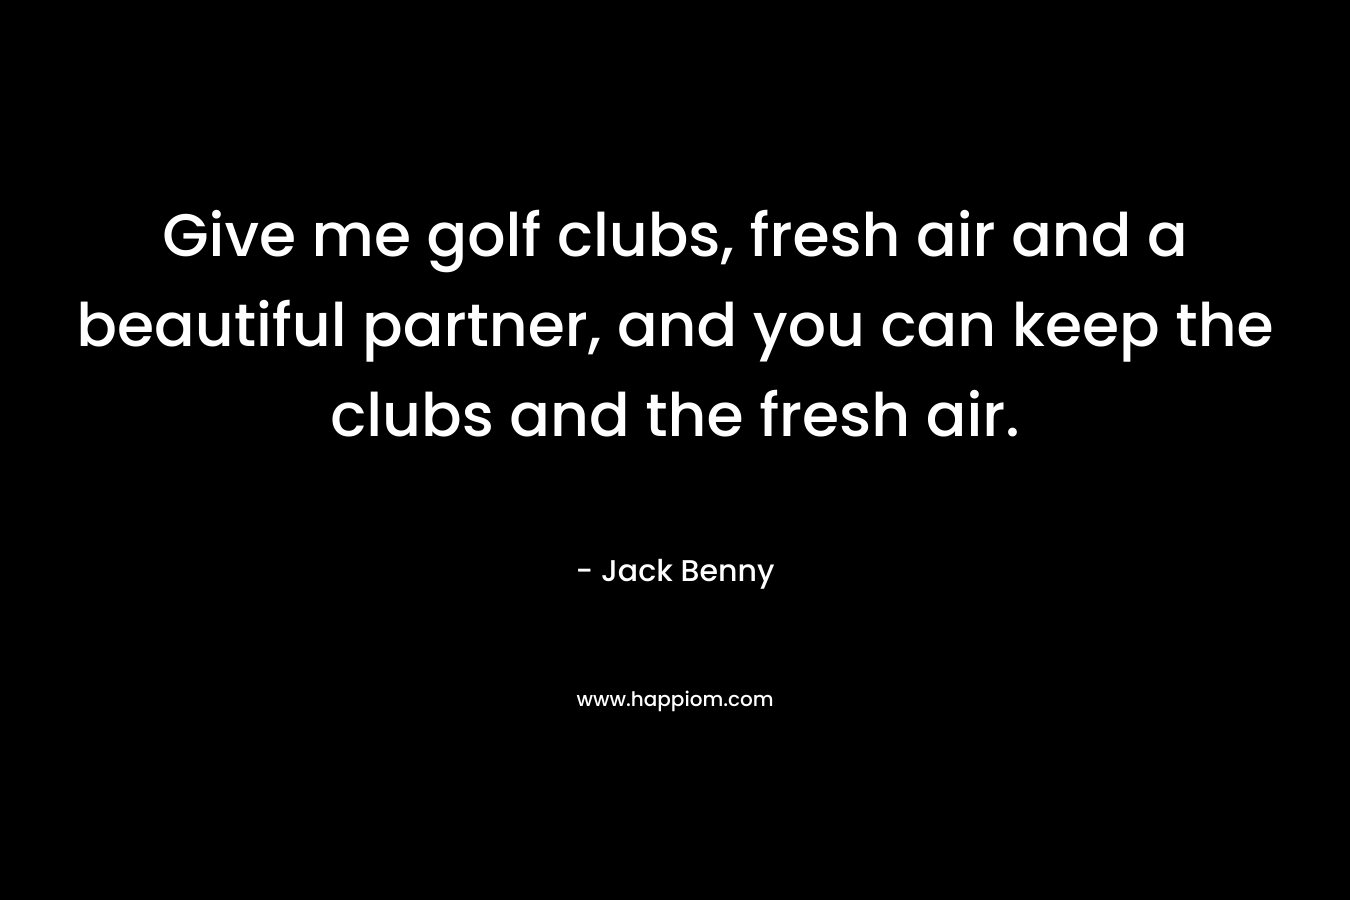 Give me golf clubs, fresh air and a beautiful partner, and you can keep the clubs and the fresh air. – Jack Benny